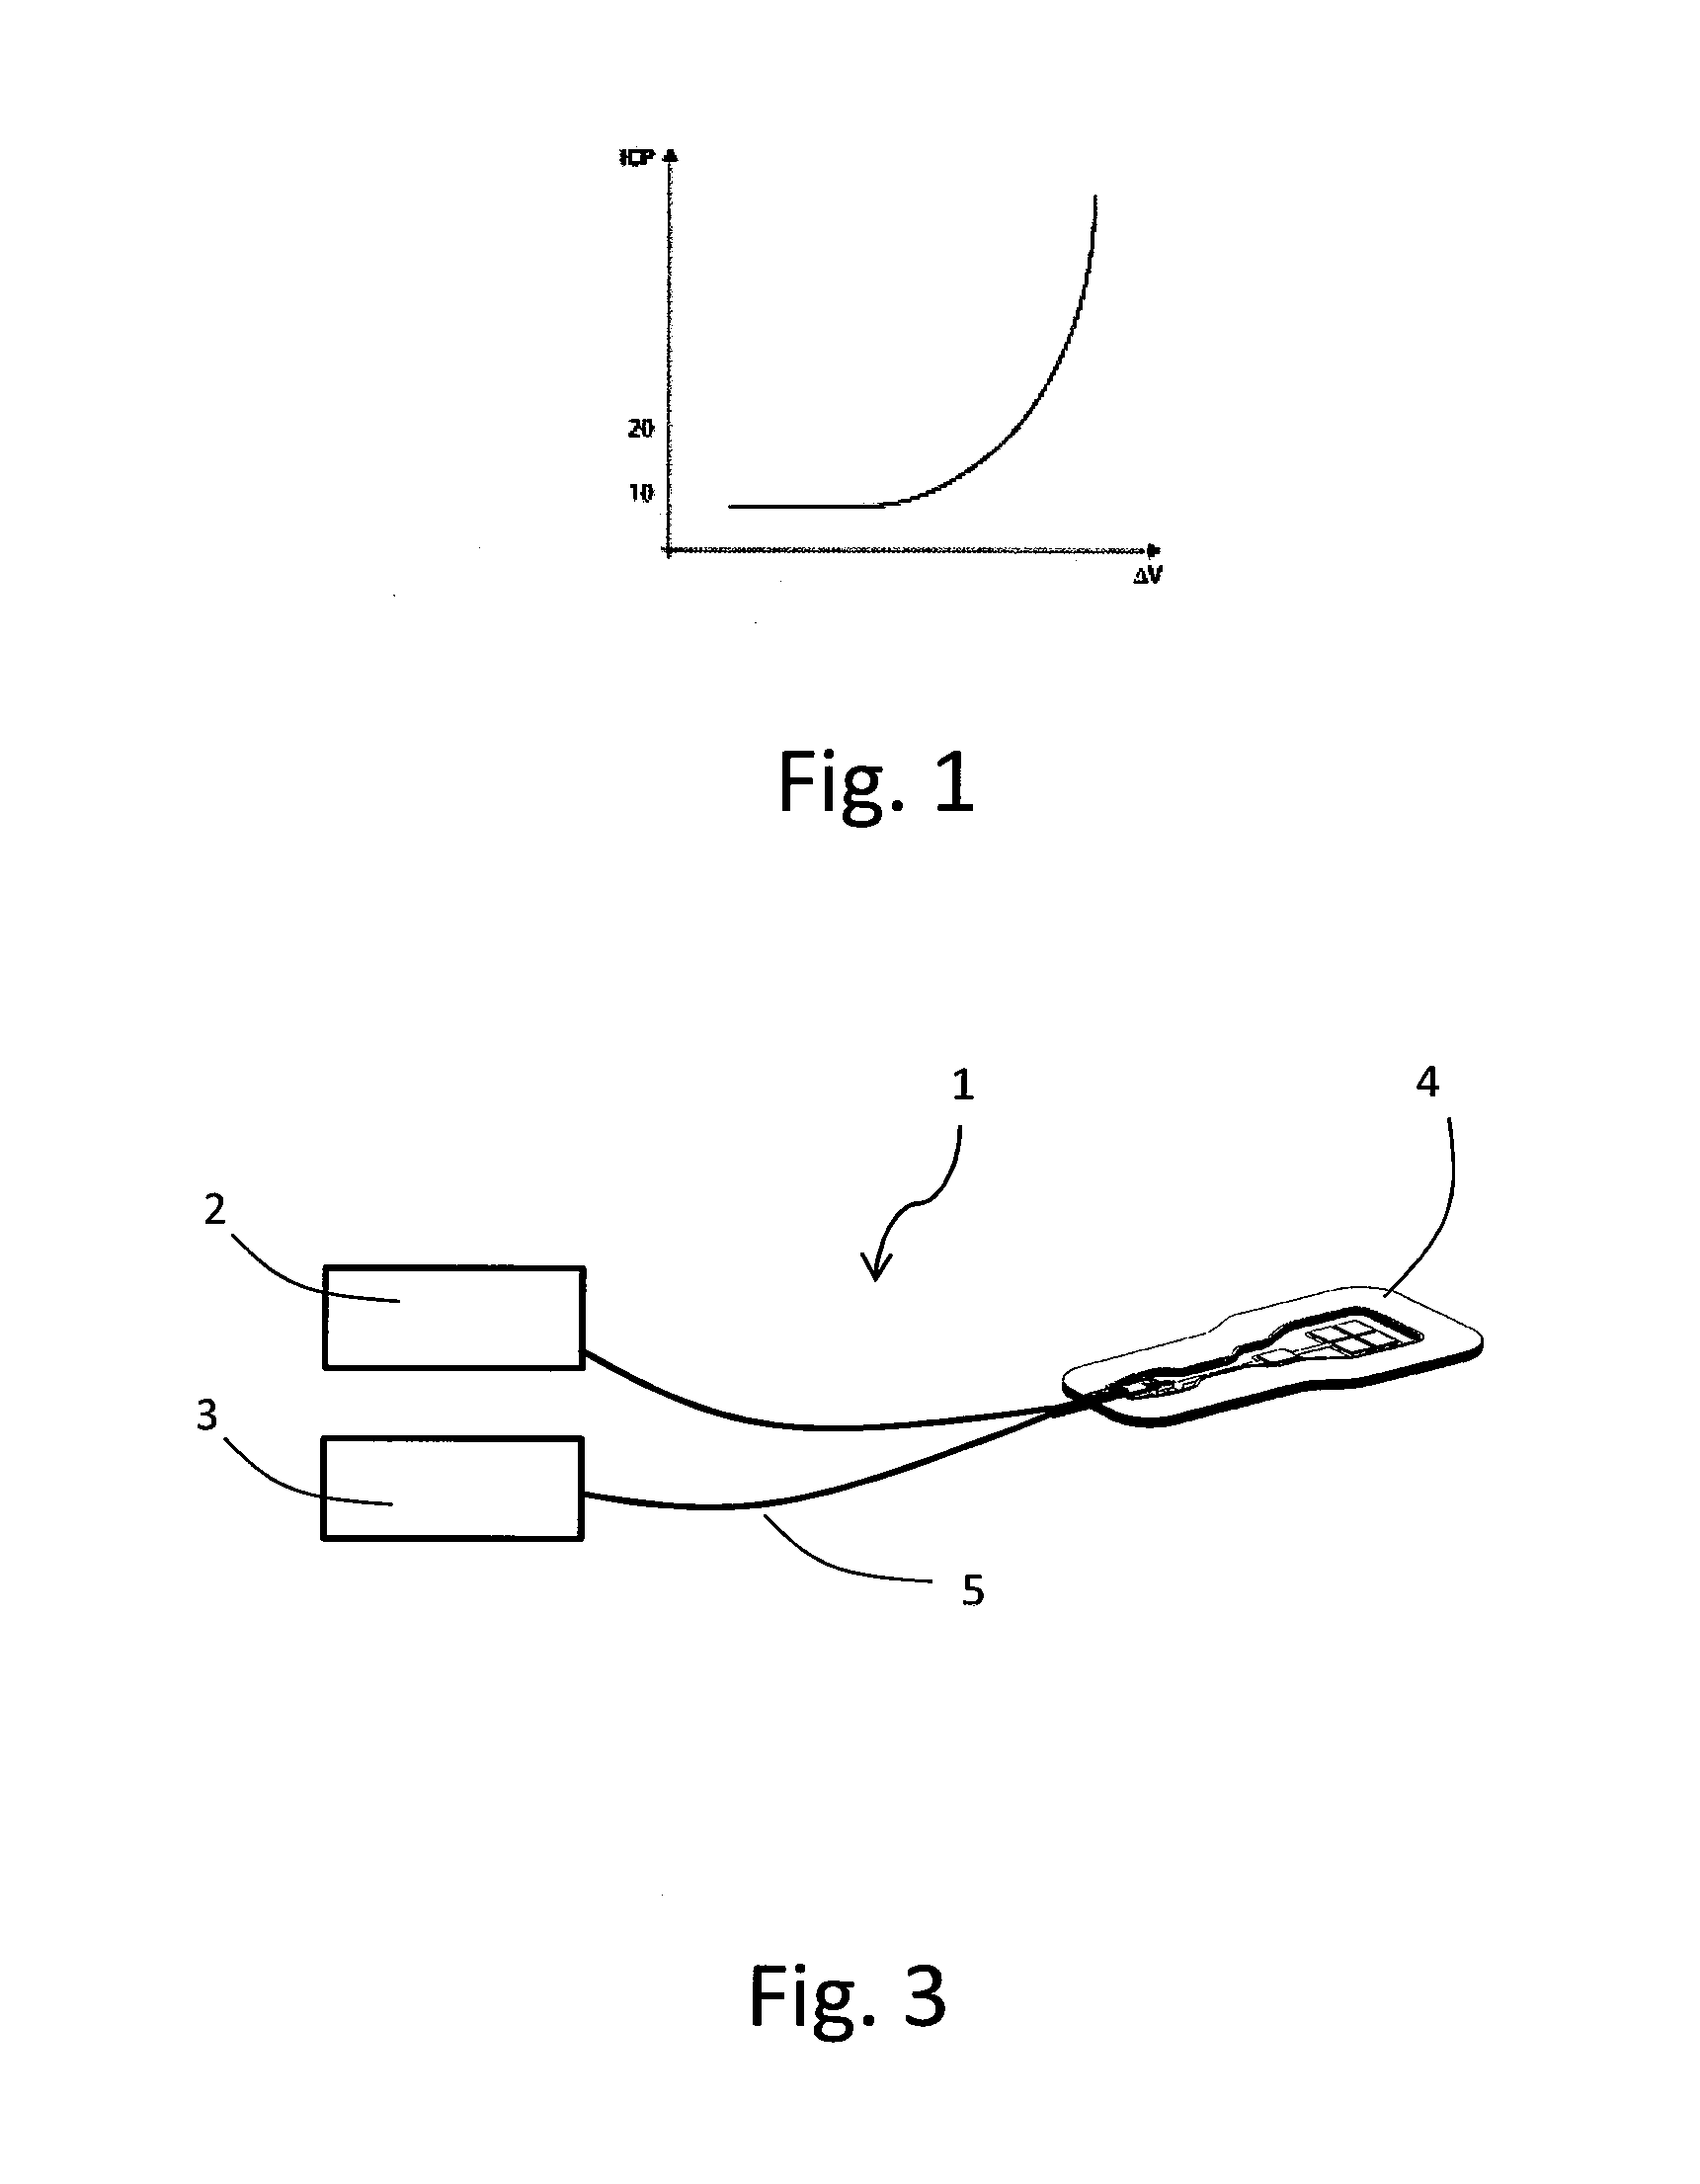 Measurement system and method for measuring parameters in a body tissue